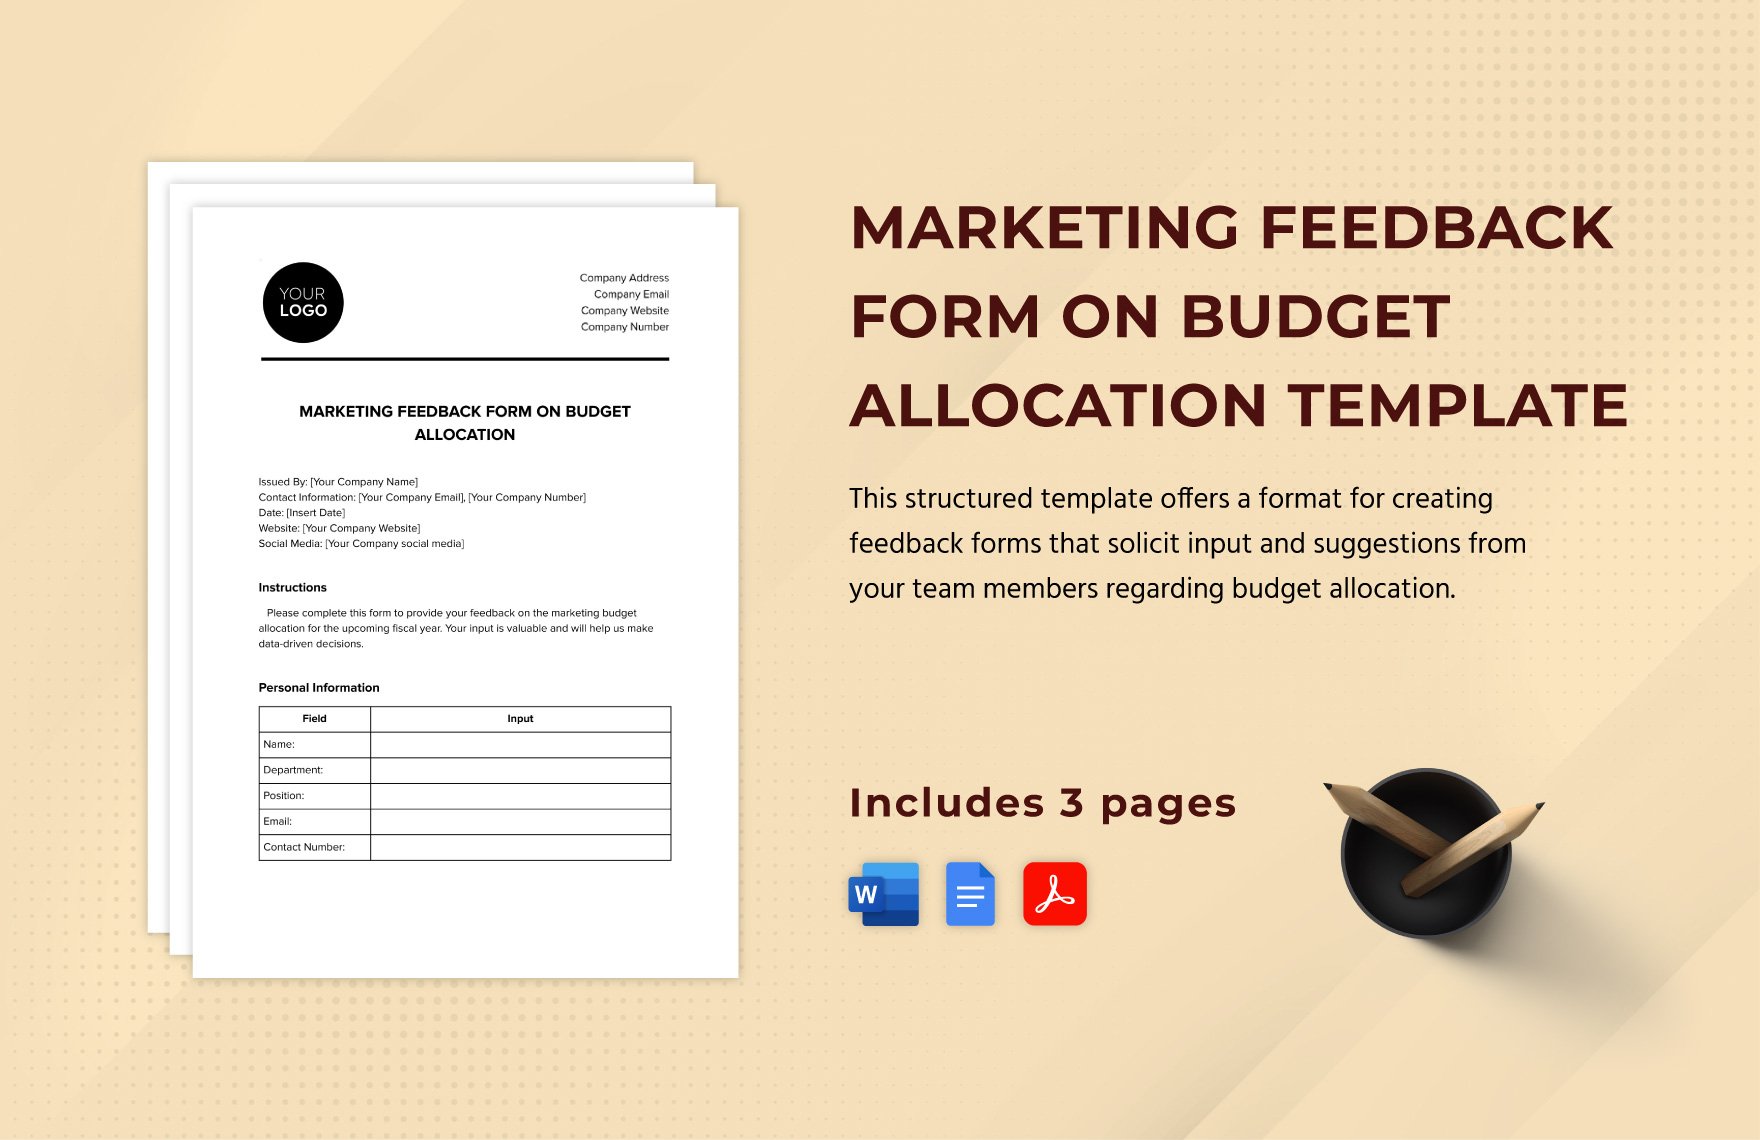 Marketing Feedback Form on Budget Allocation Template